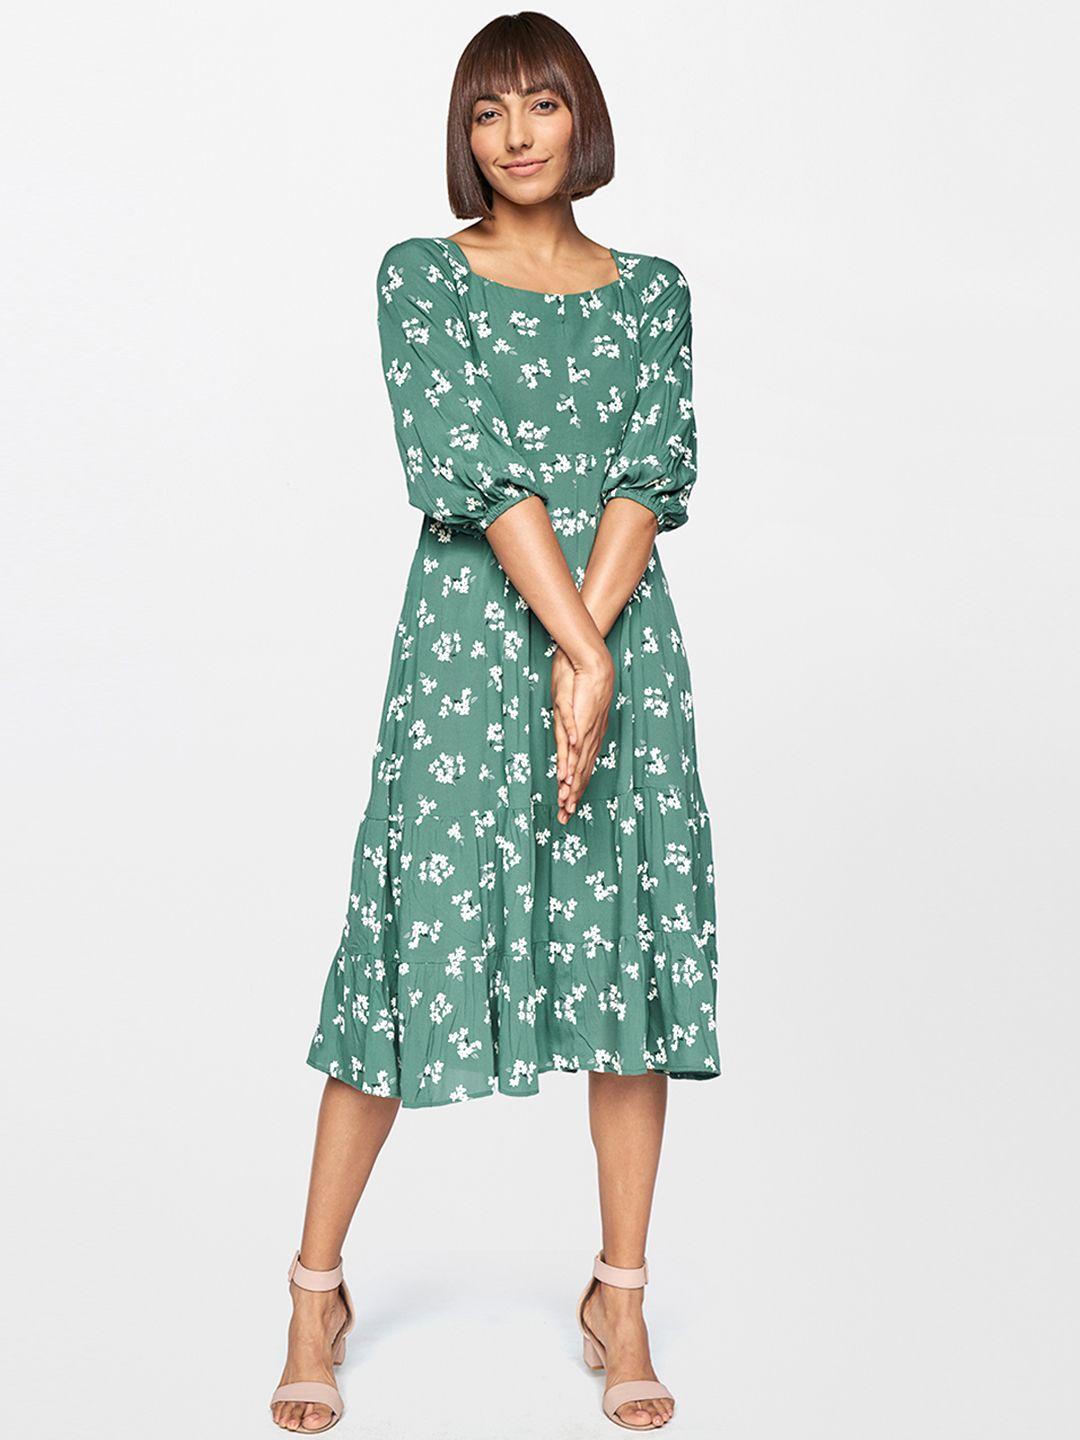 AND Green & White Floral Midi Dress